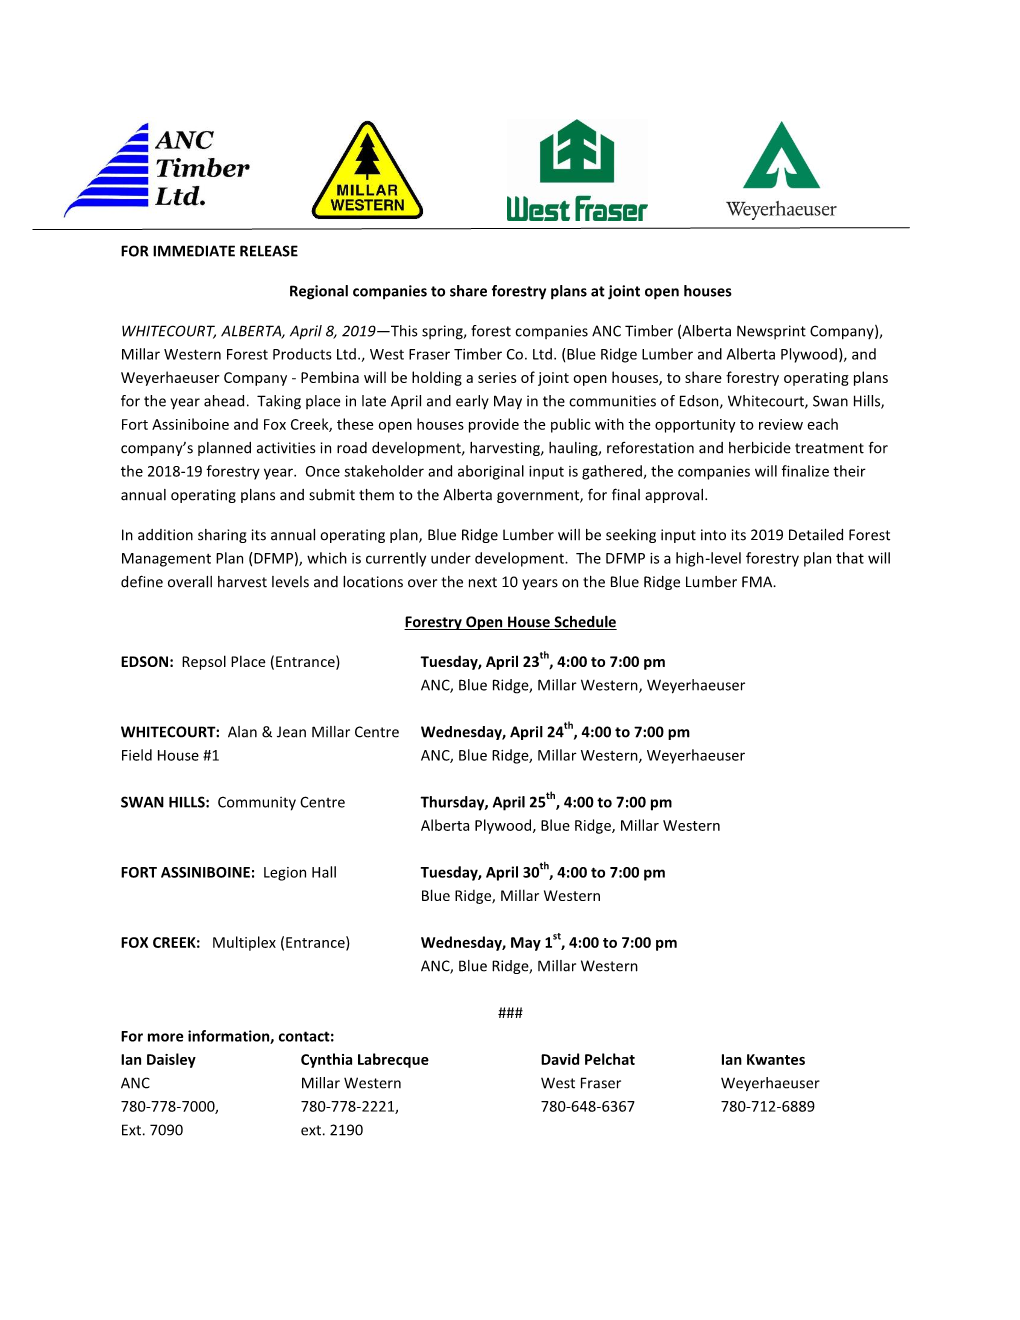 FOR IMMEDIATE RELEASE Regional Companies to Share Forestry Plans